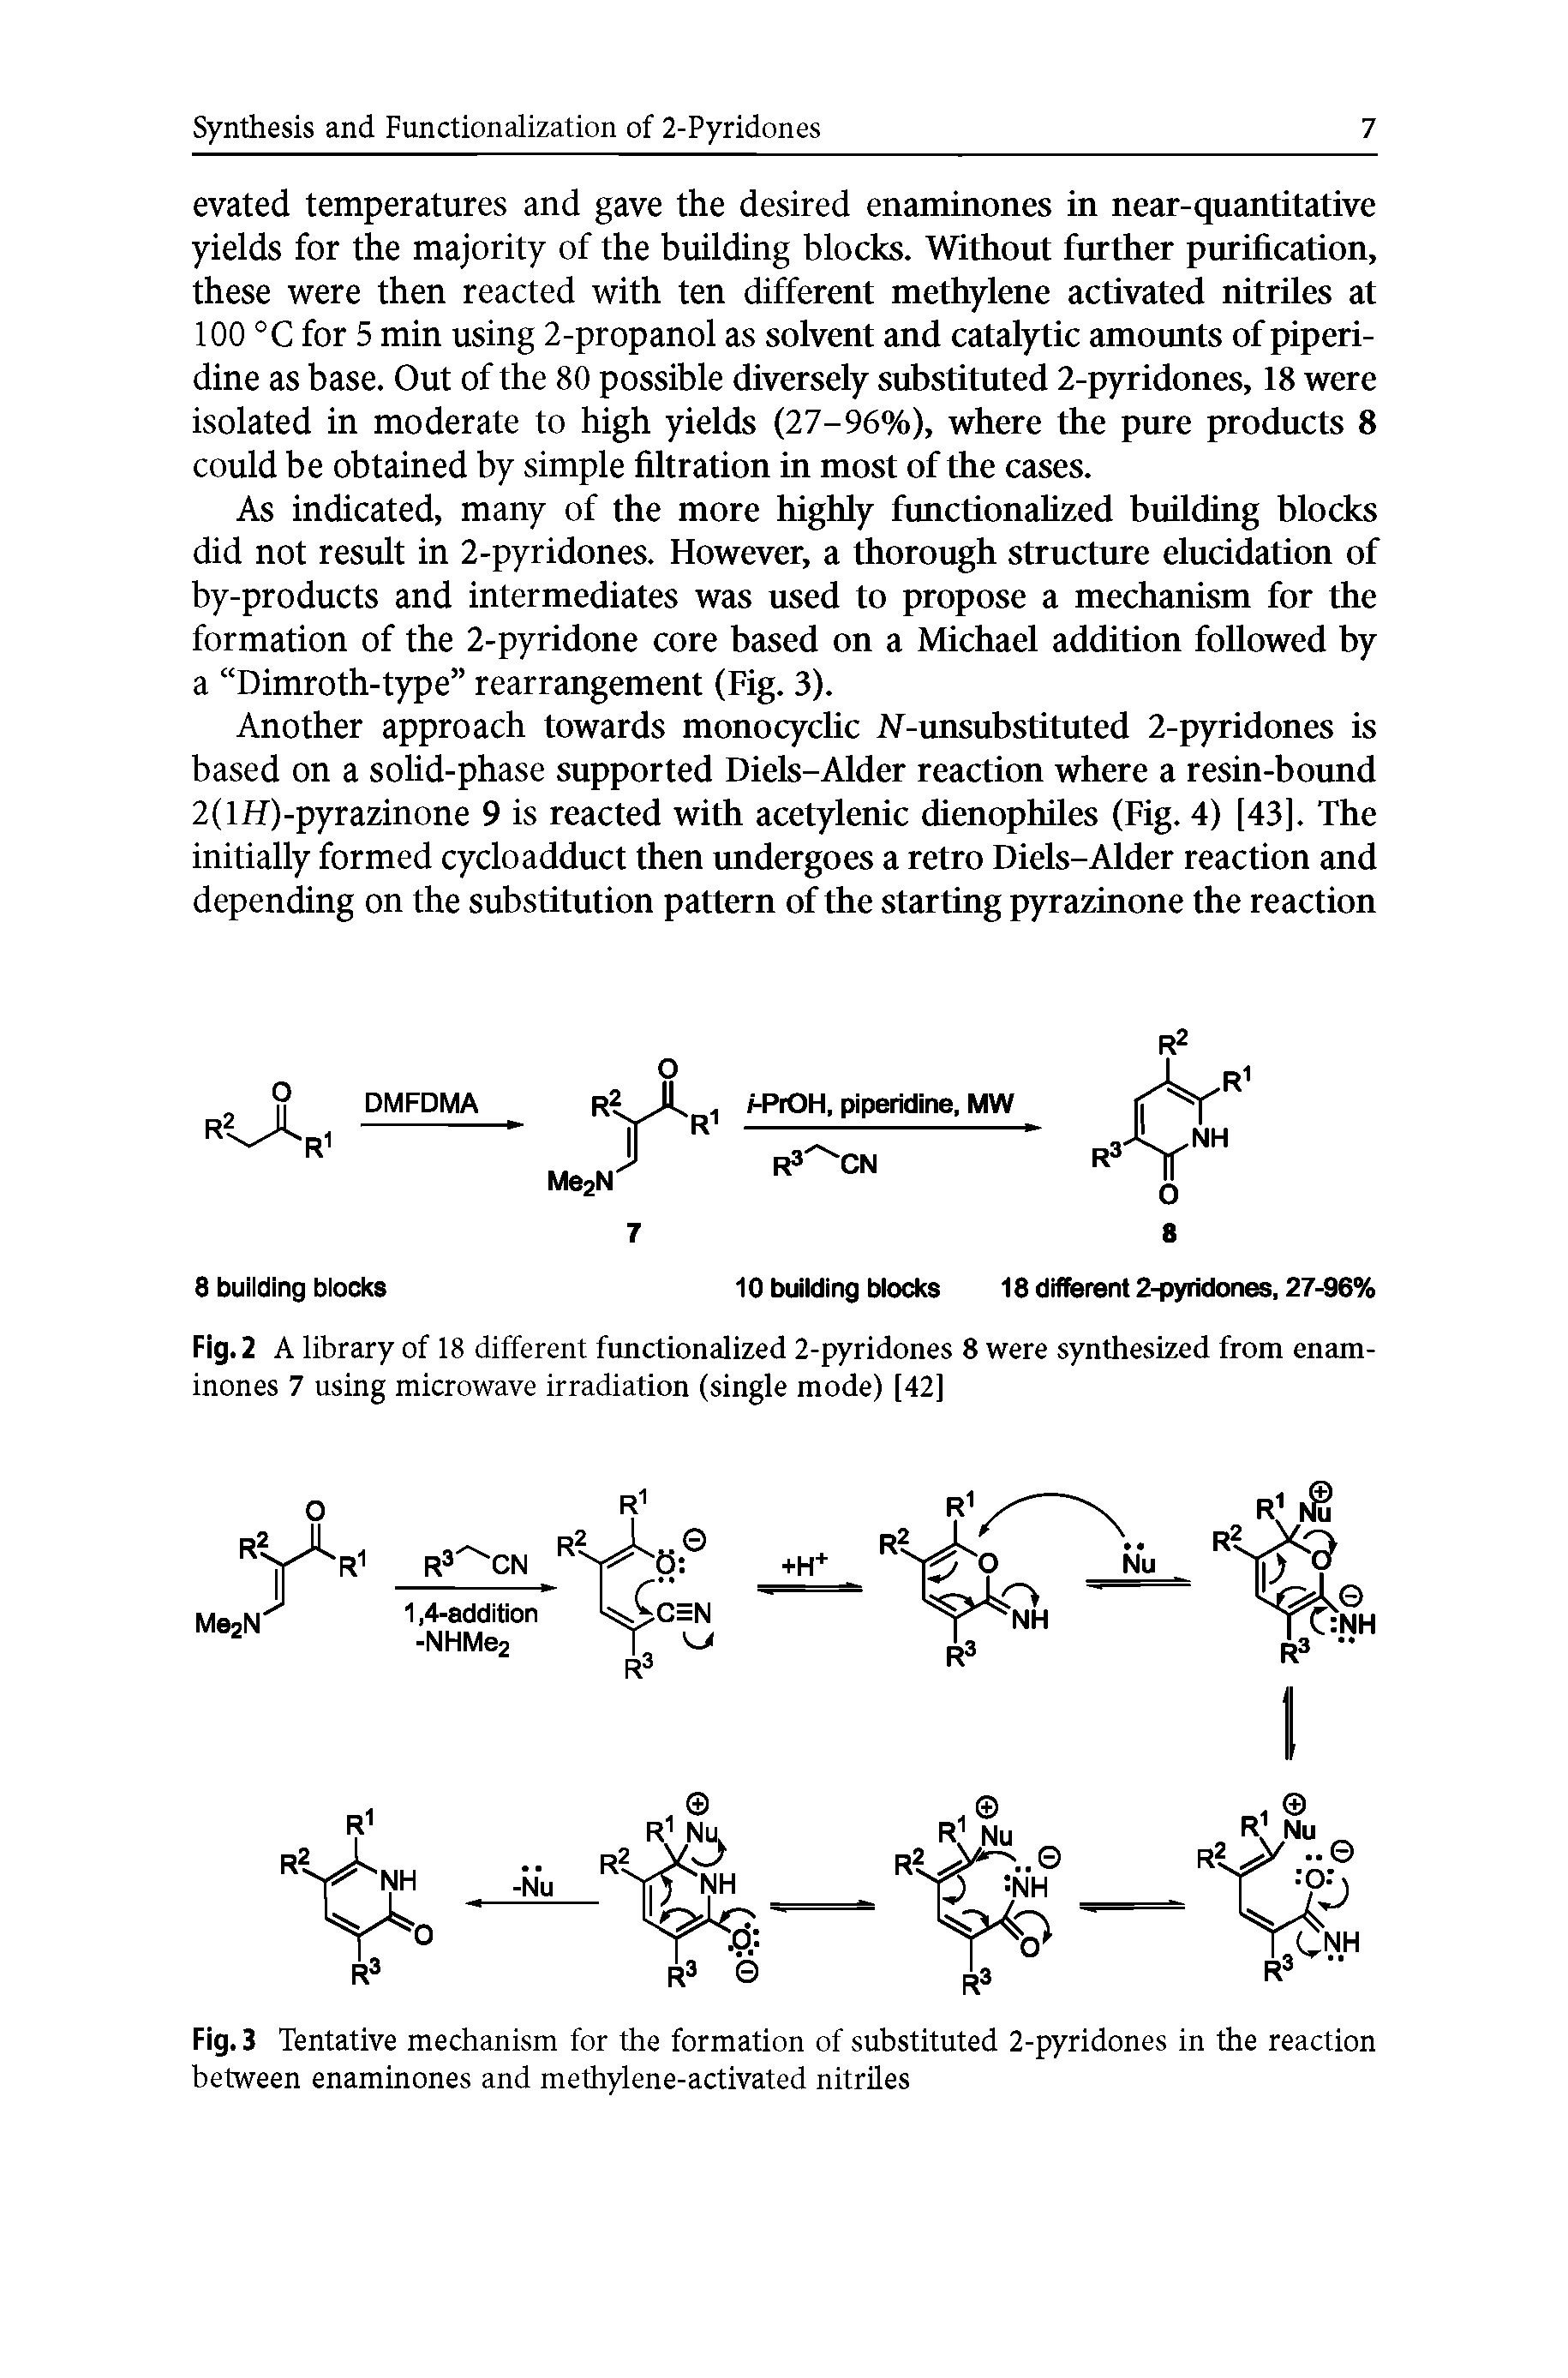 Fig. 3 Tentative mechanism for the formation of substituted 2-pyridones in the reaction between enaminones and methylene-activated nitriles...